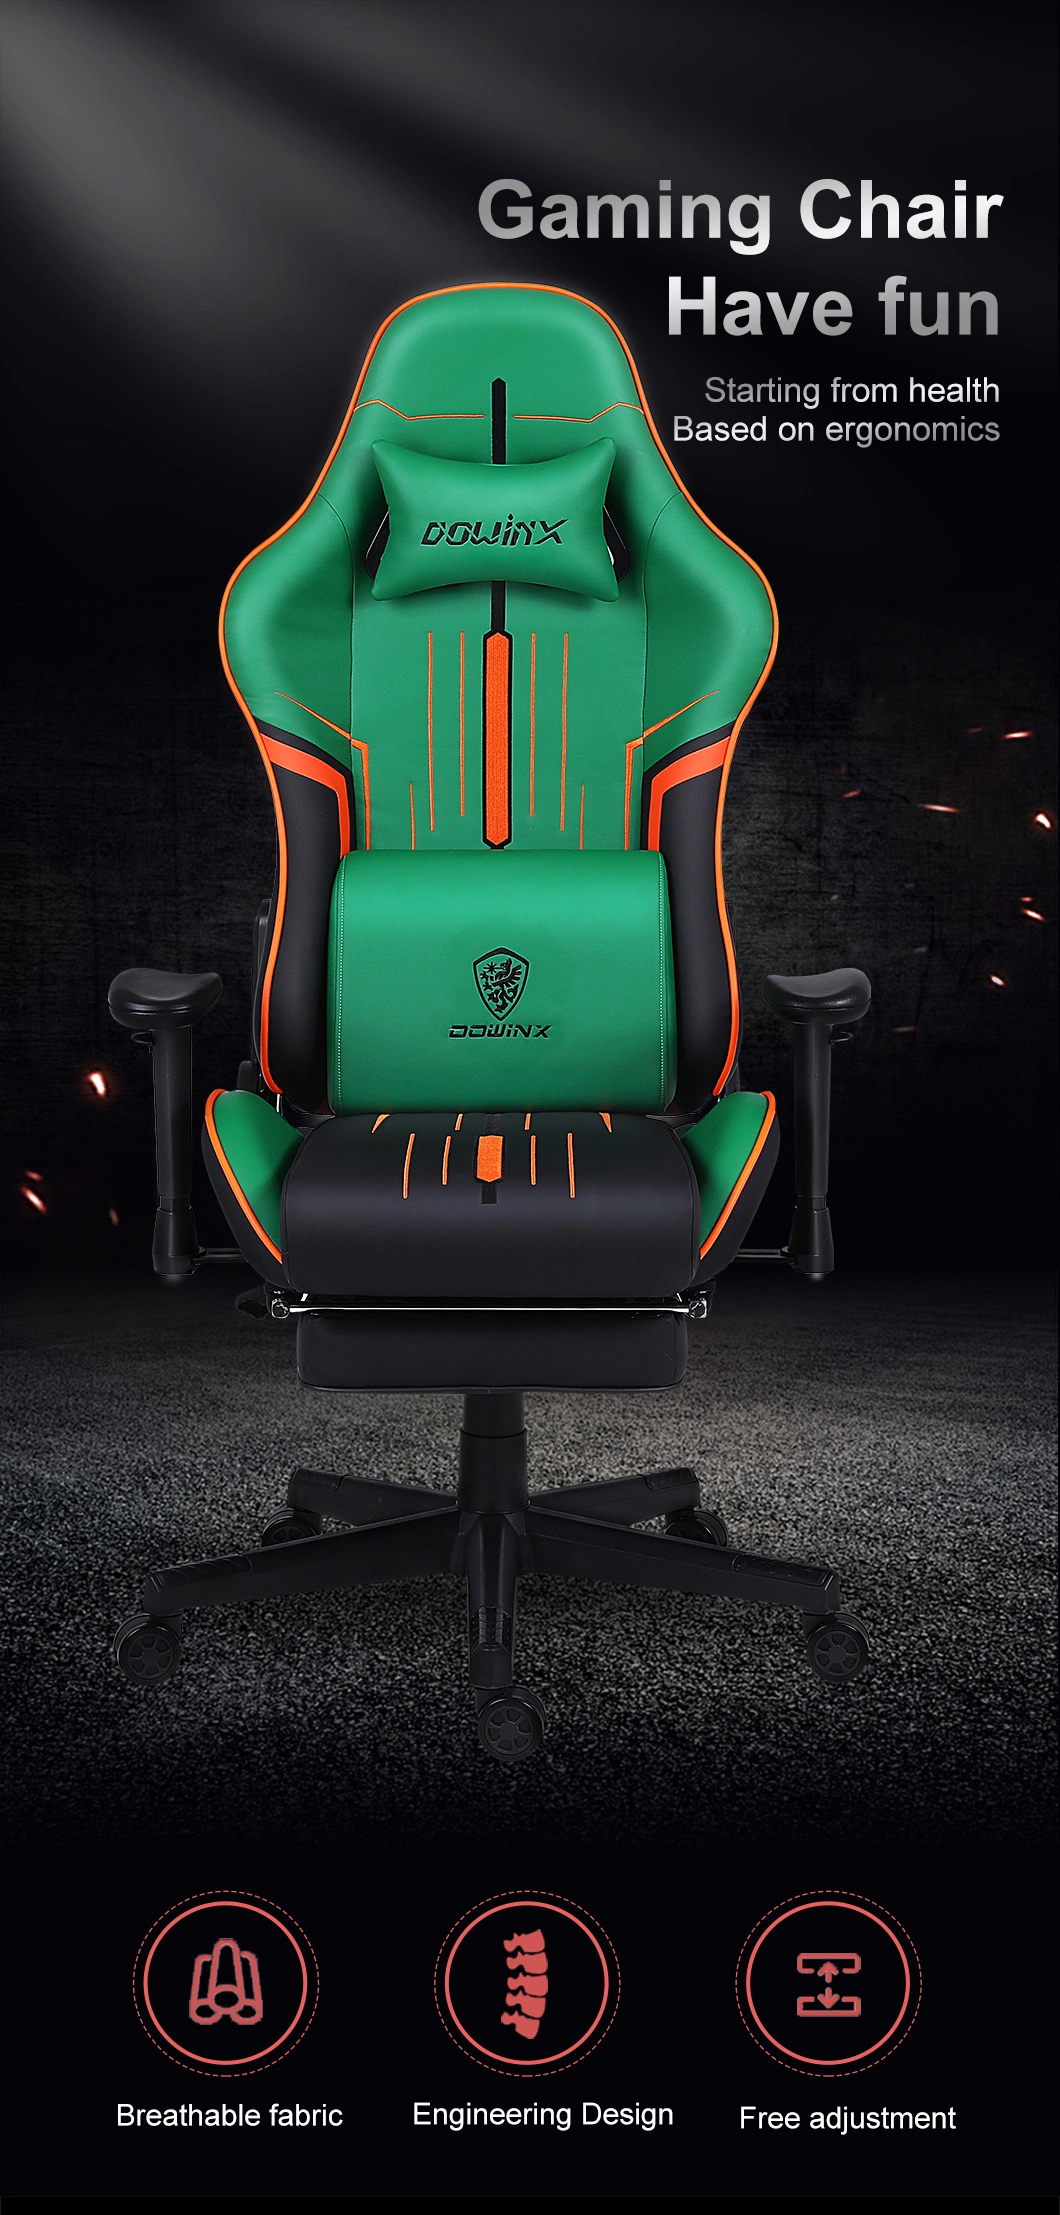 High-Back Ergonomic Racing Seat PU Leather 90-180 Degree Backrest Adjustment Thickened Foam Retractable Footrest Gaming Chair